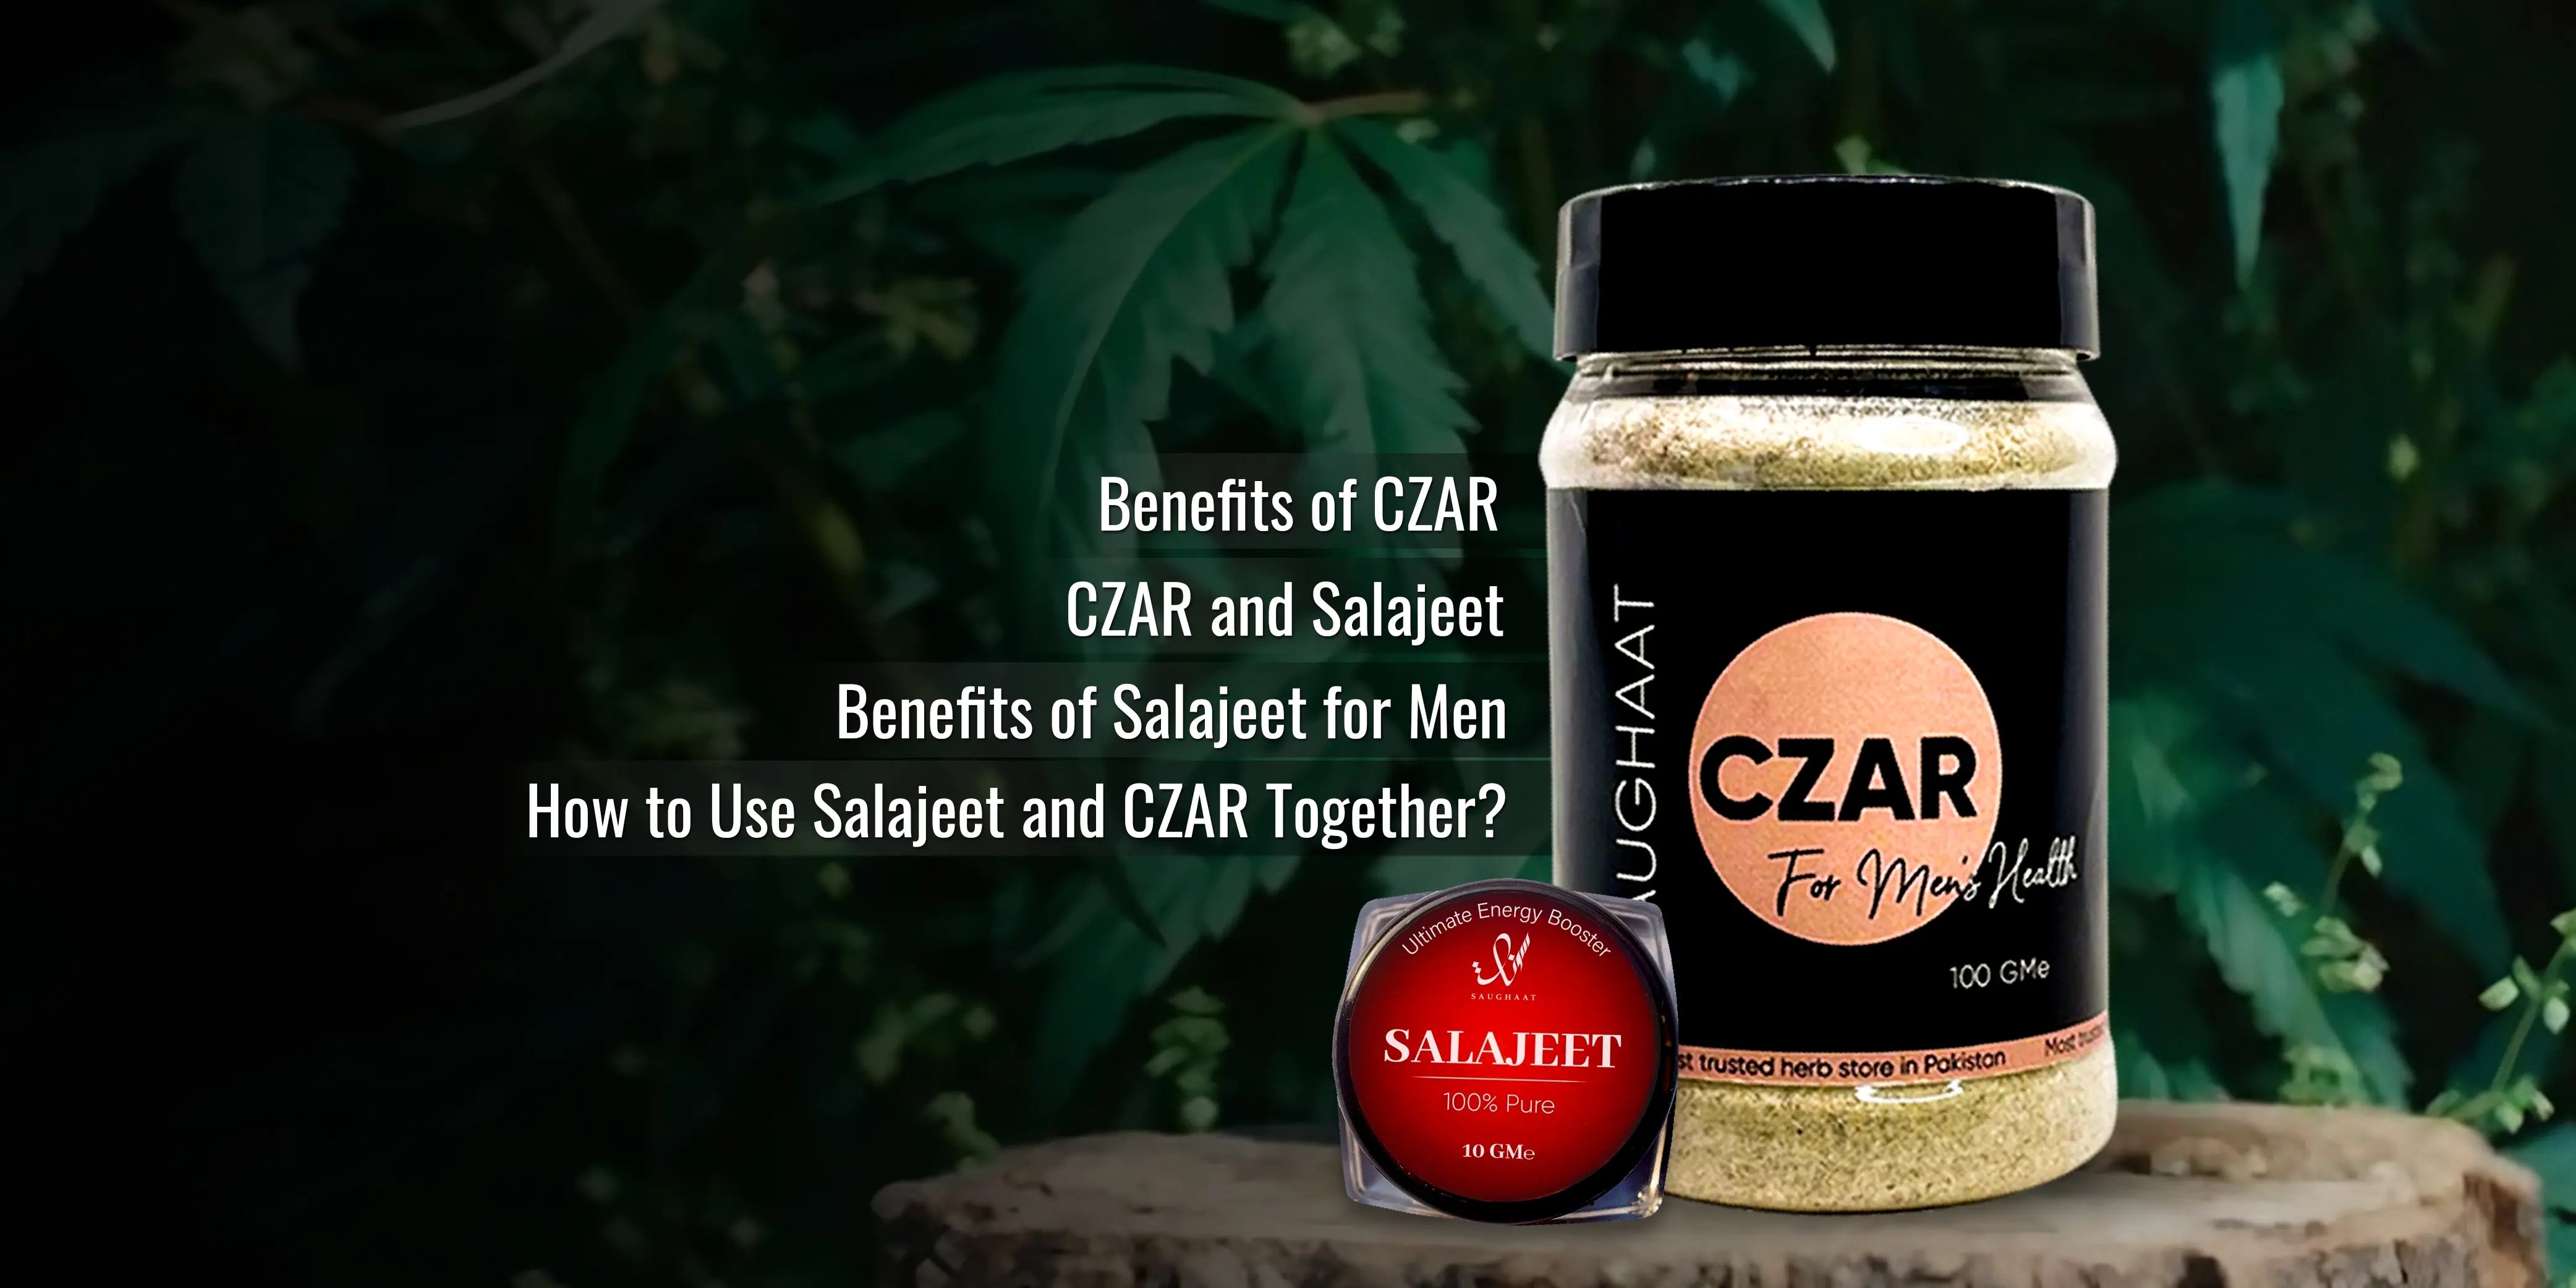 CZAR and Salajeet is the best solution for all men’s health issues